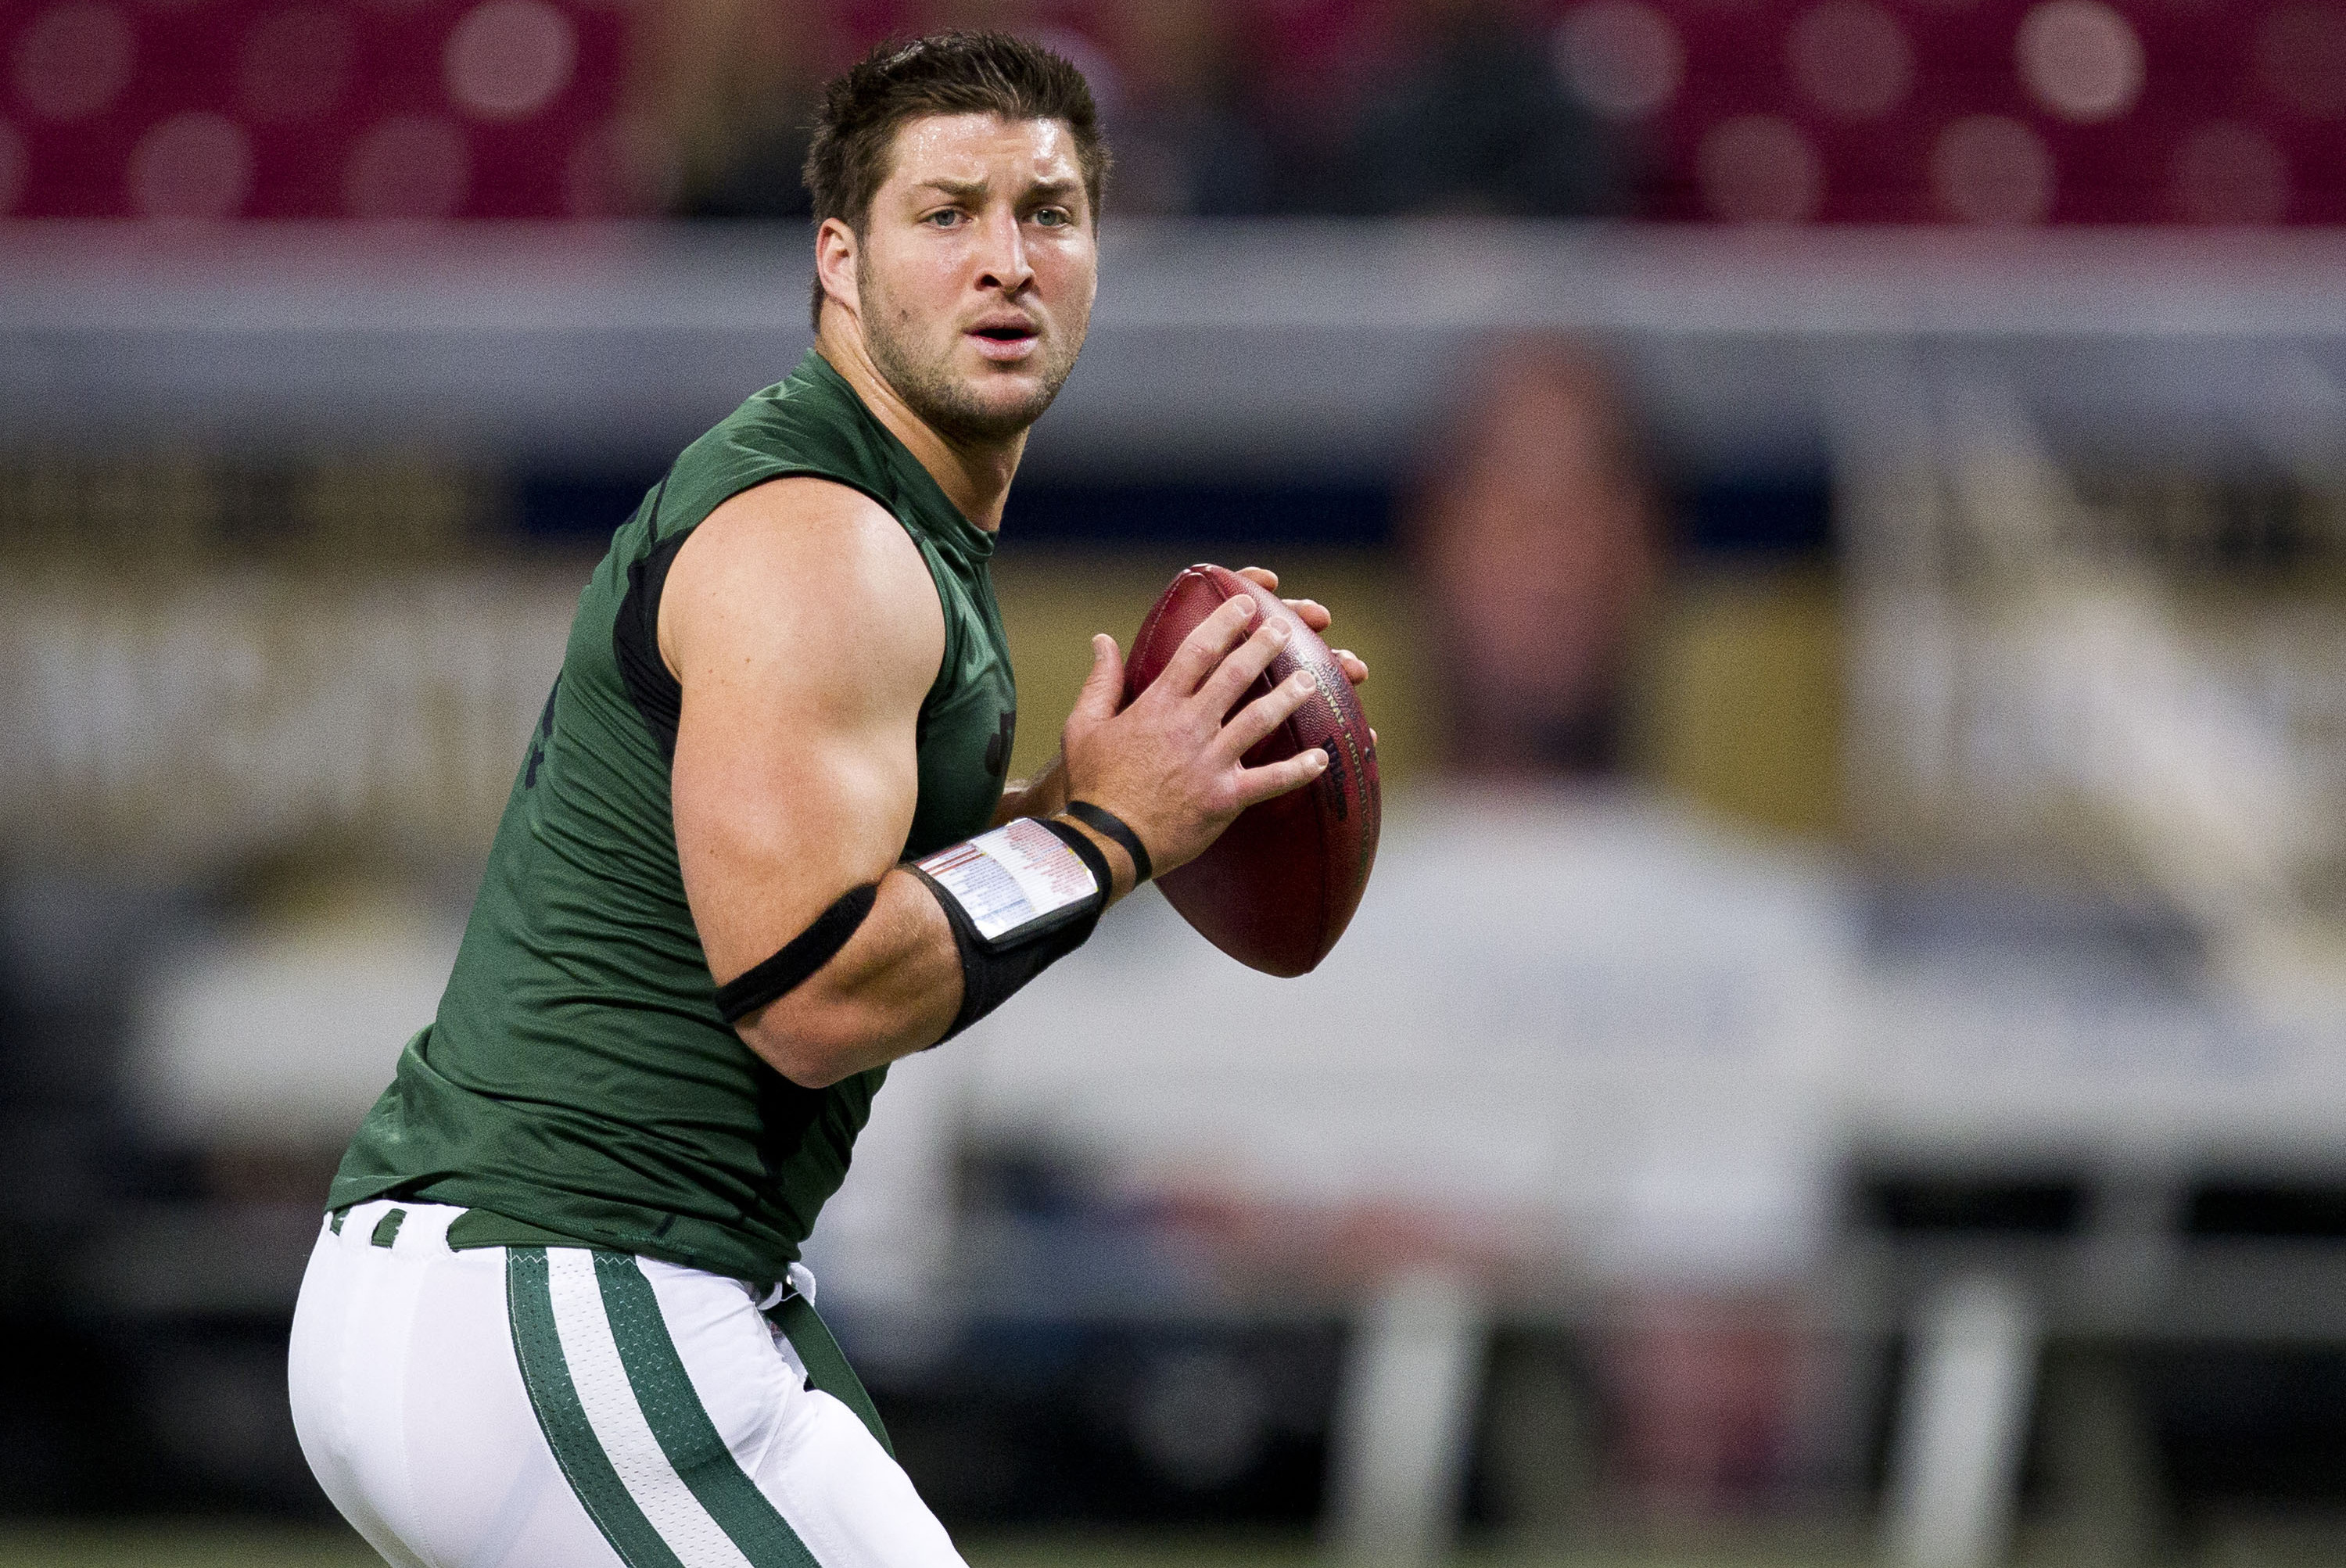 The Tim Tebow jerseys are already for sale - NBC Sports